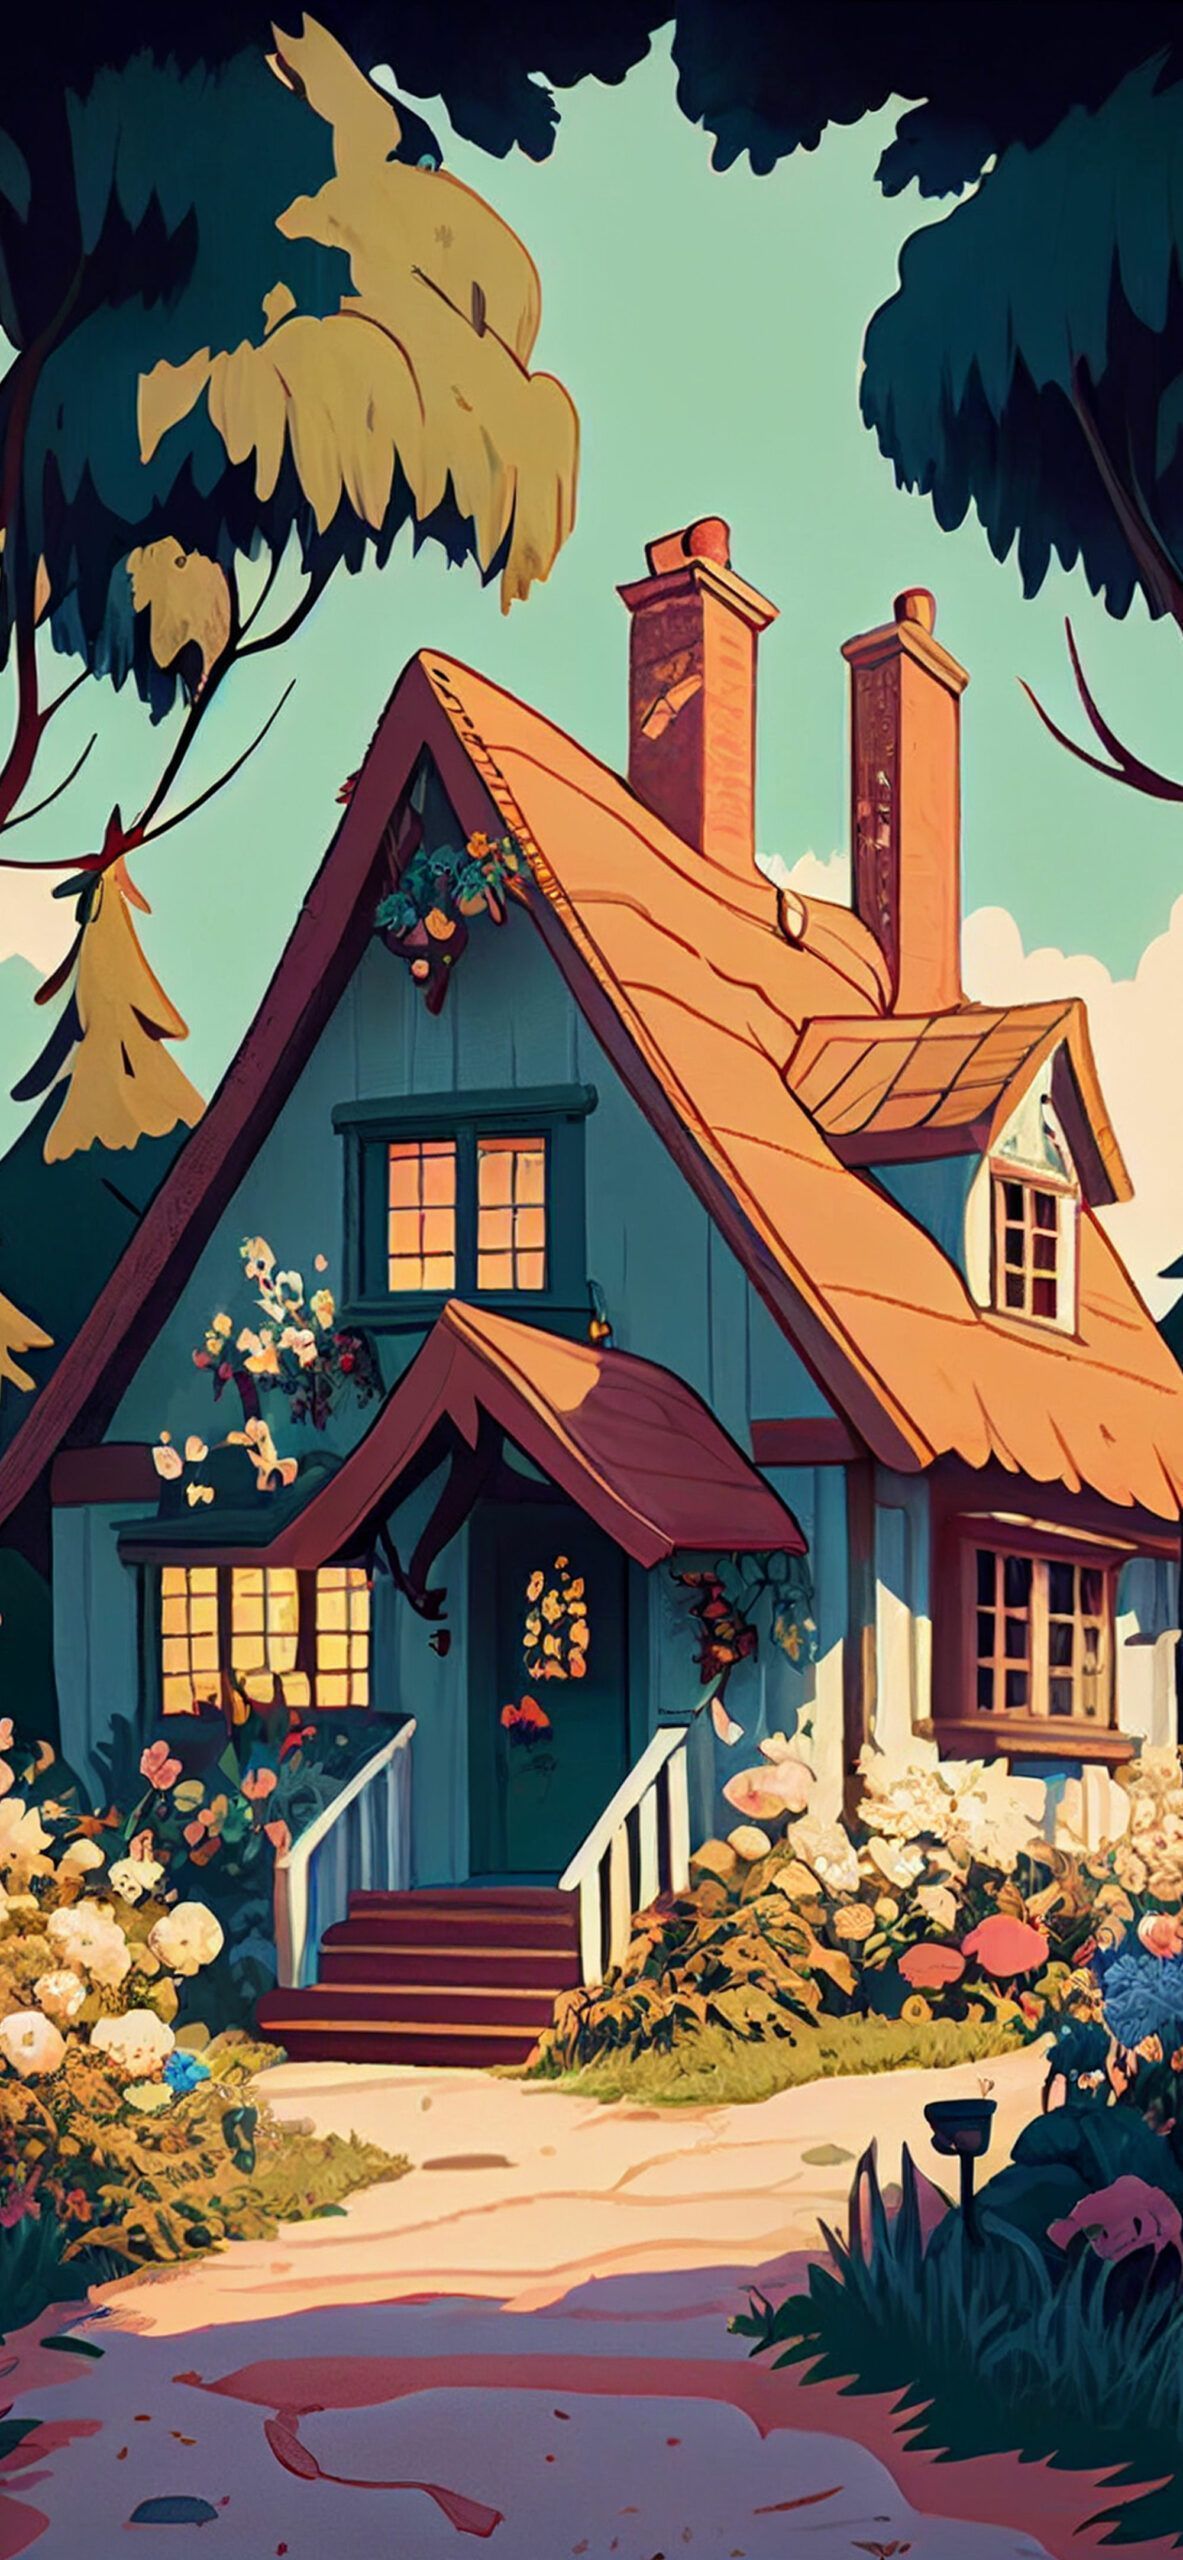 A cartoon house with flowers and trees - Cottagecore